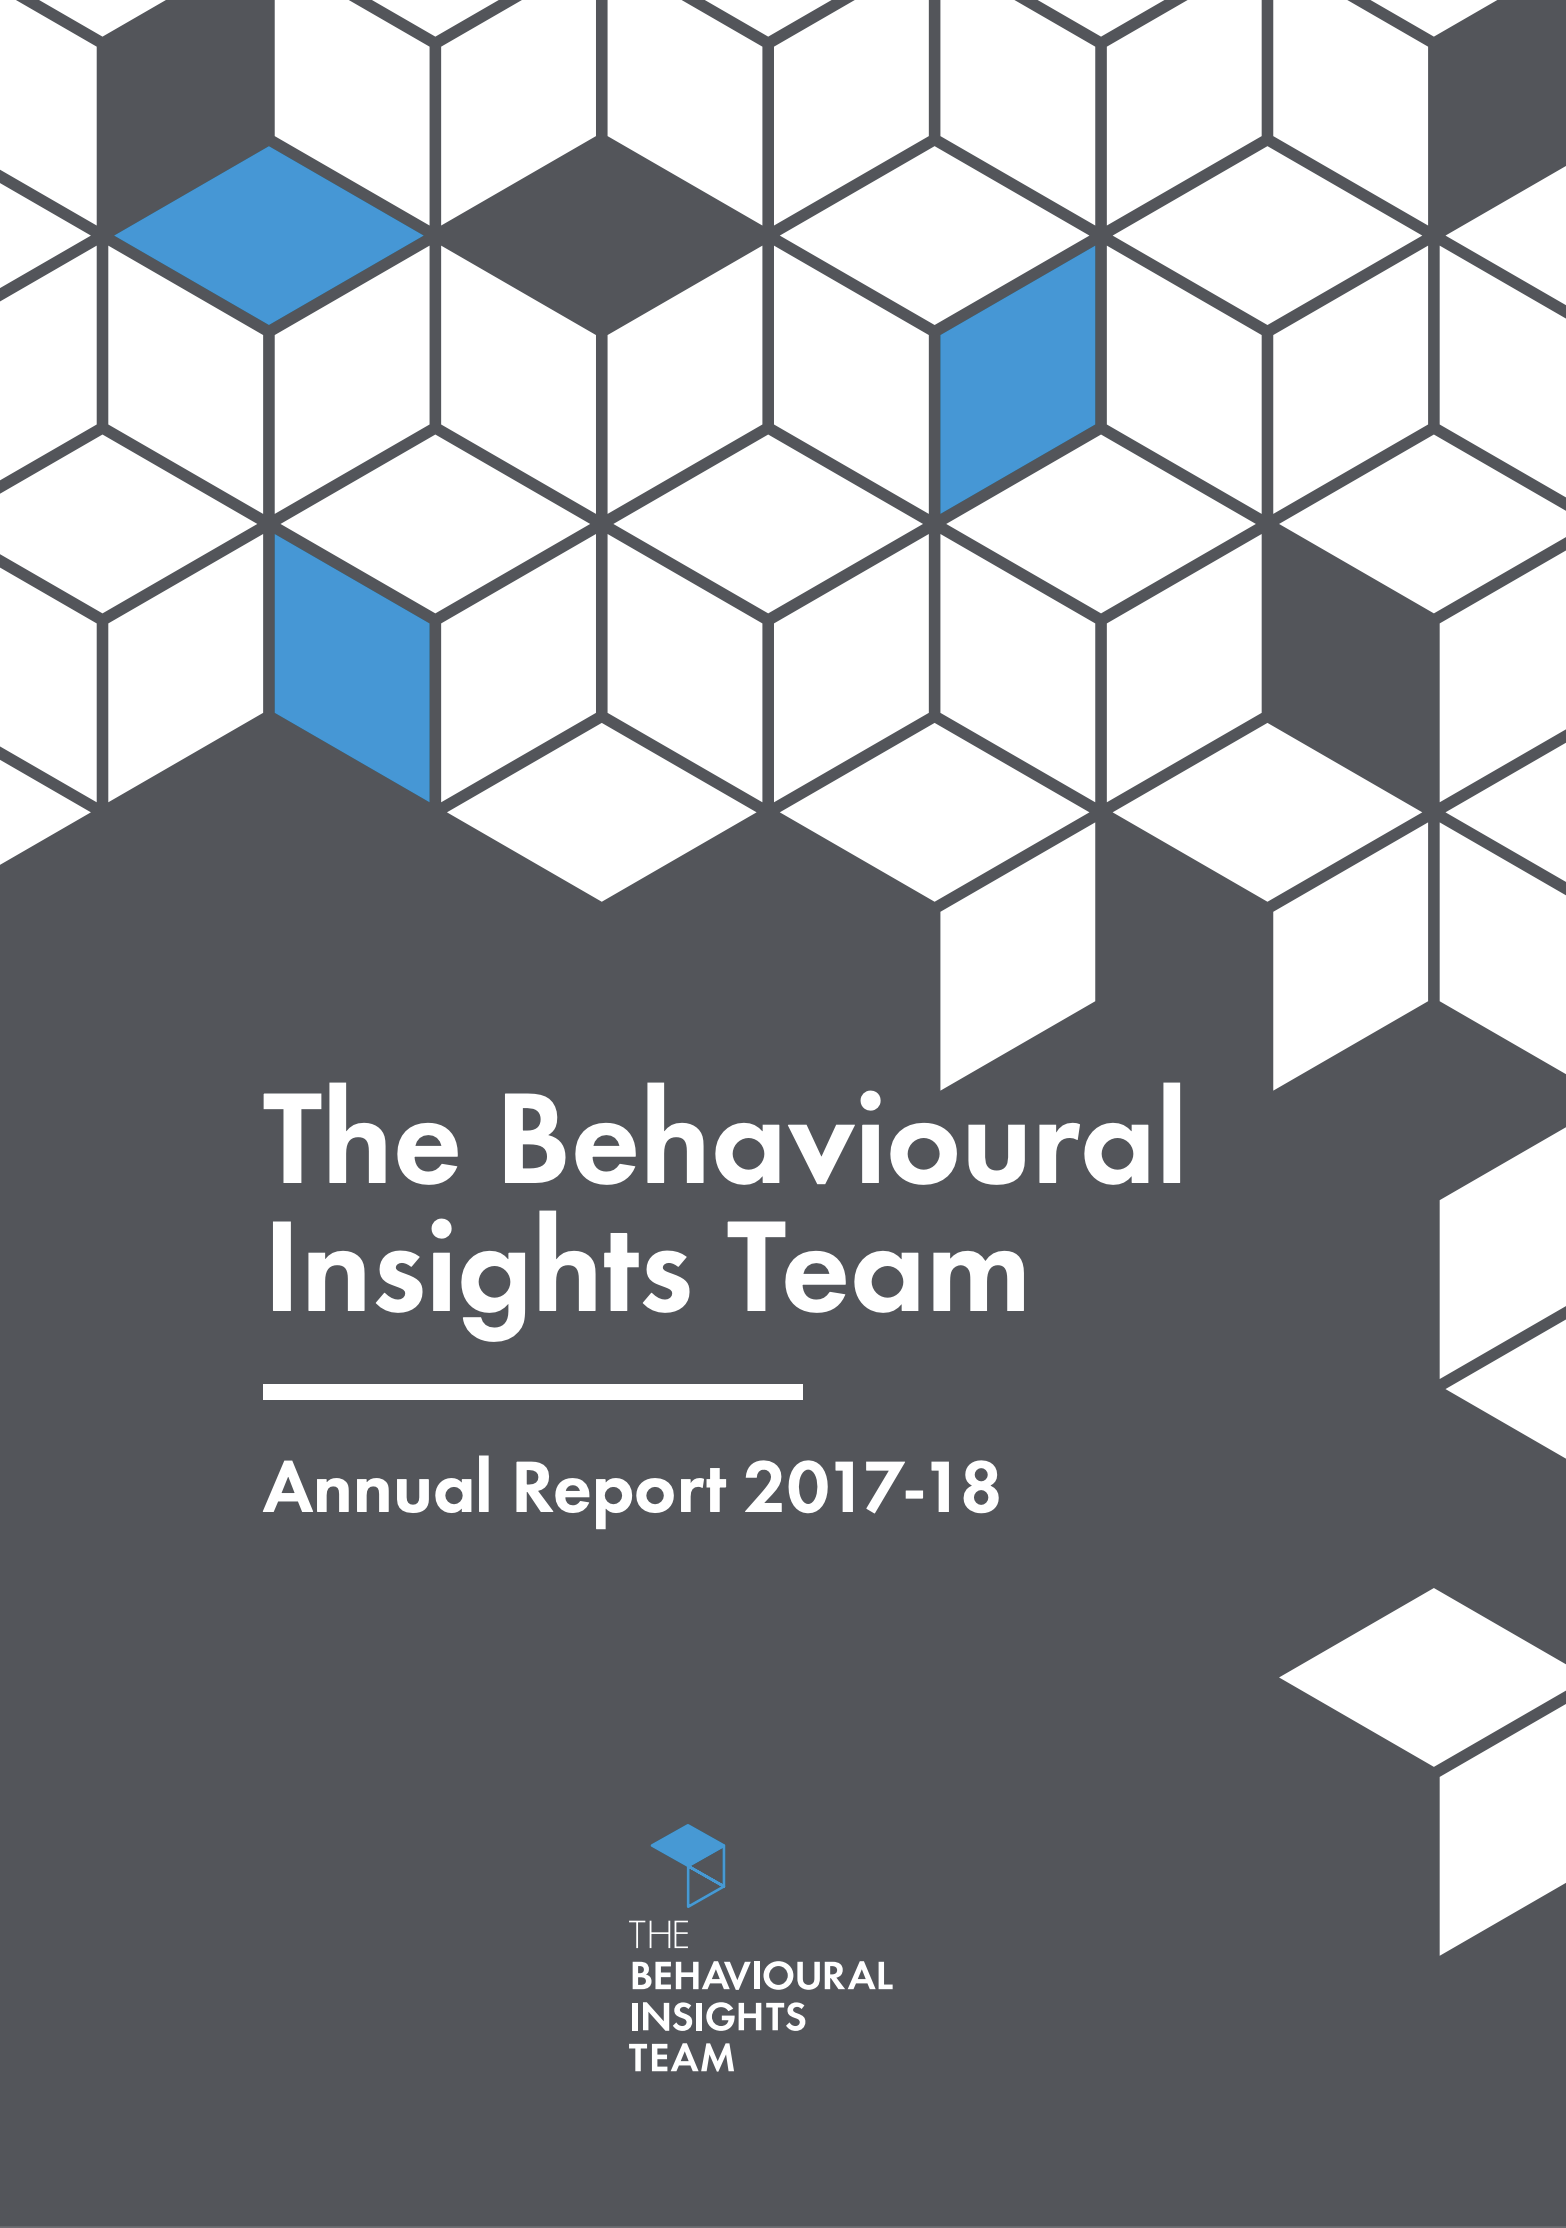 The Behavioural Insights Team Annual Report